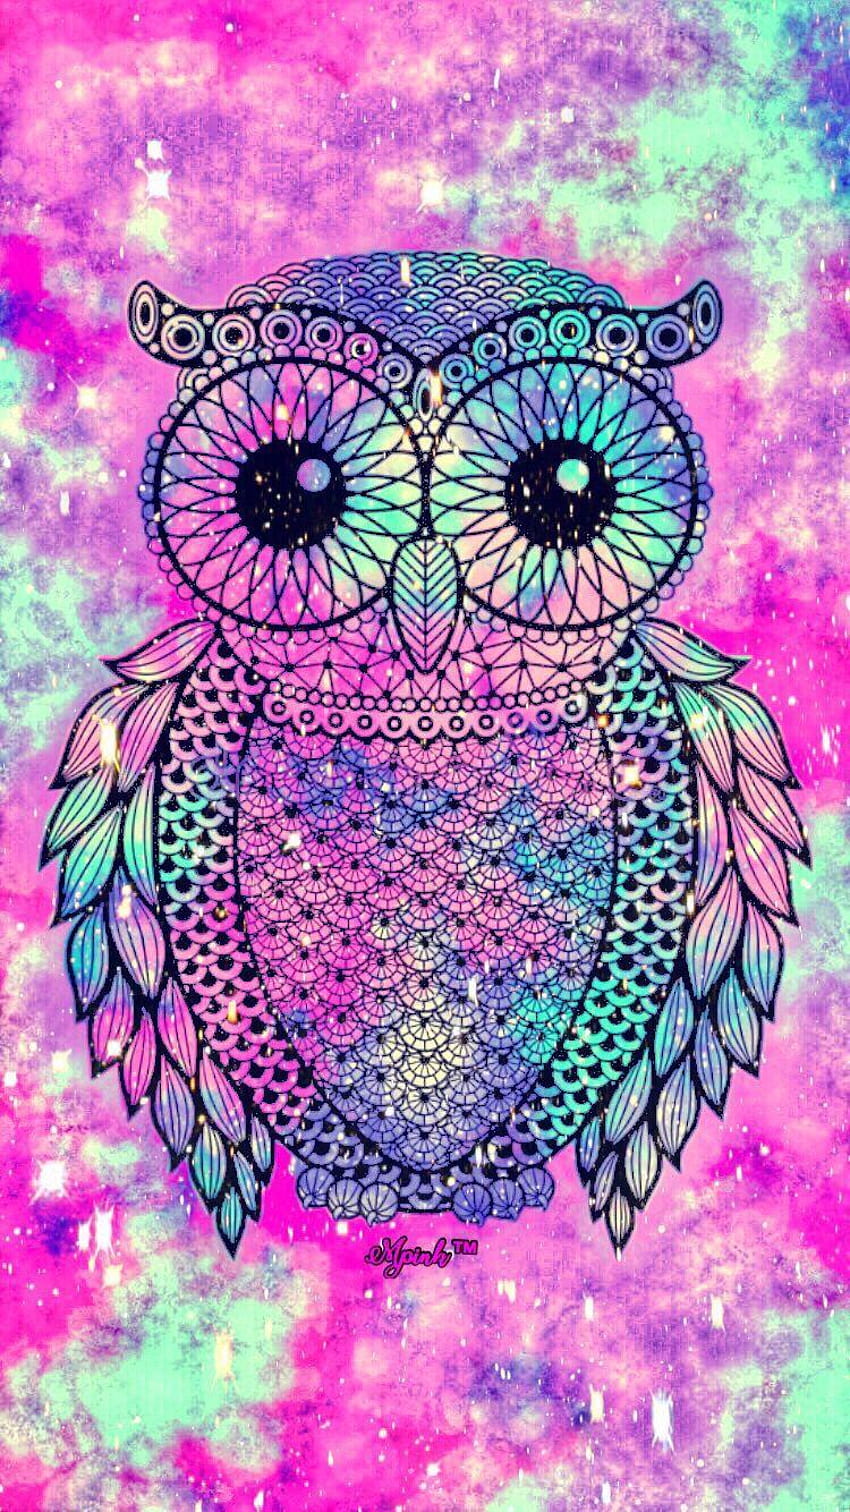 Cute Owl Galaxy iPhone/Android, vintage owl tumblr HD phone wallpaper